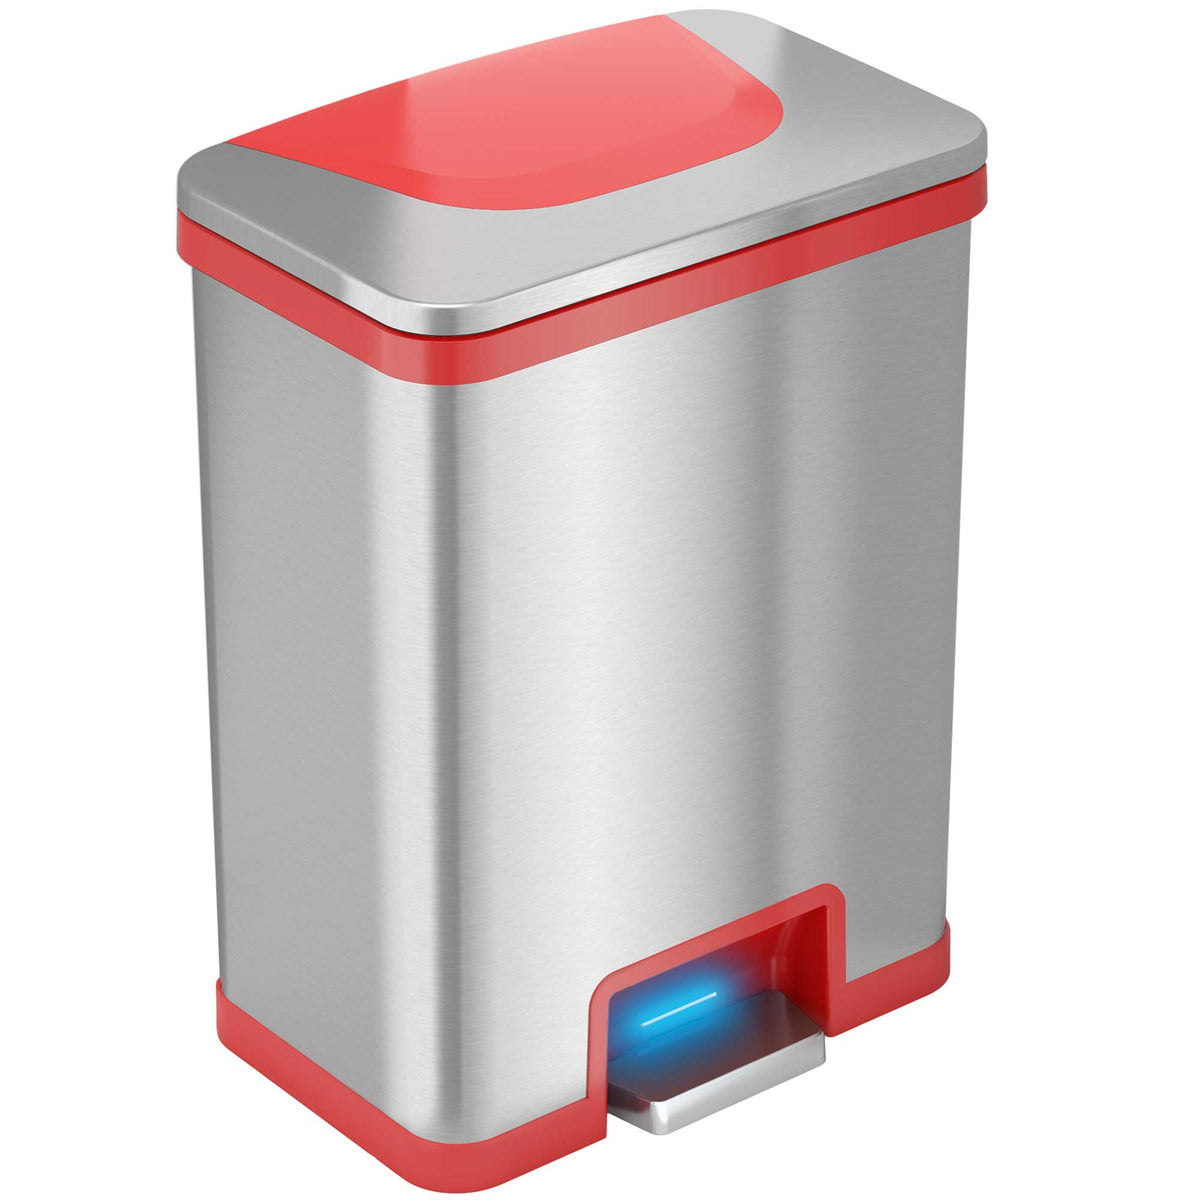 13 Gallon AutoStep Stainless Steel Pedal Sensor Trash Can (Red